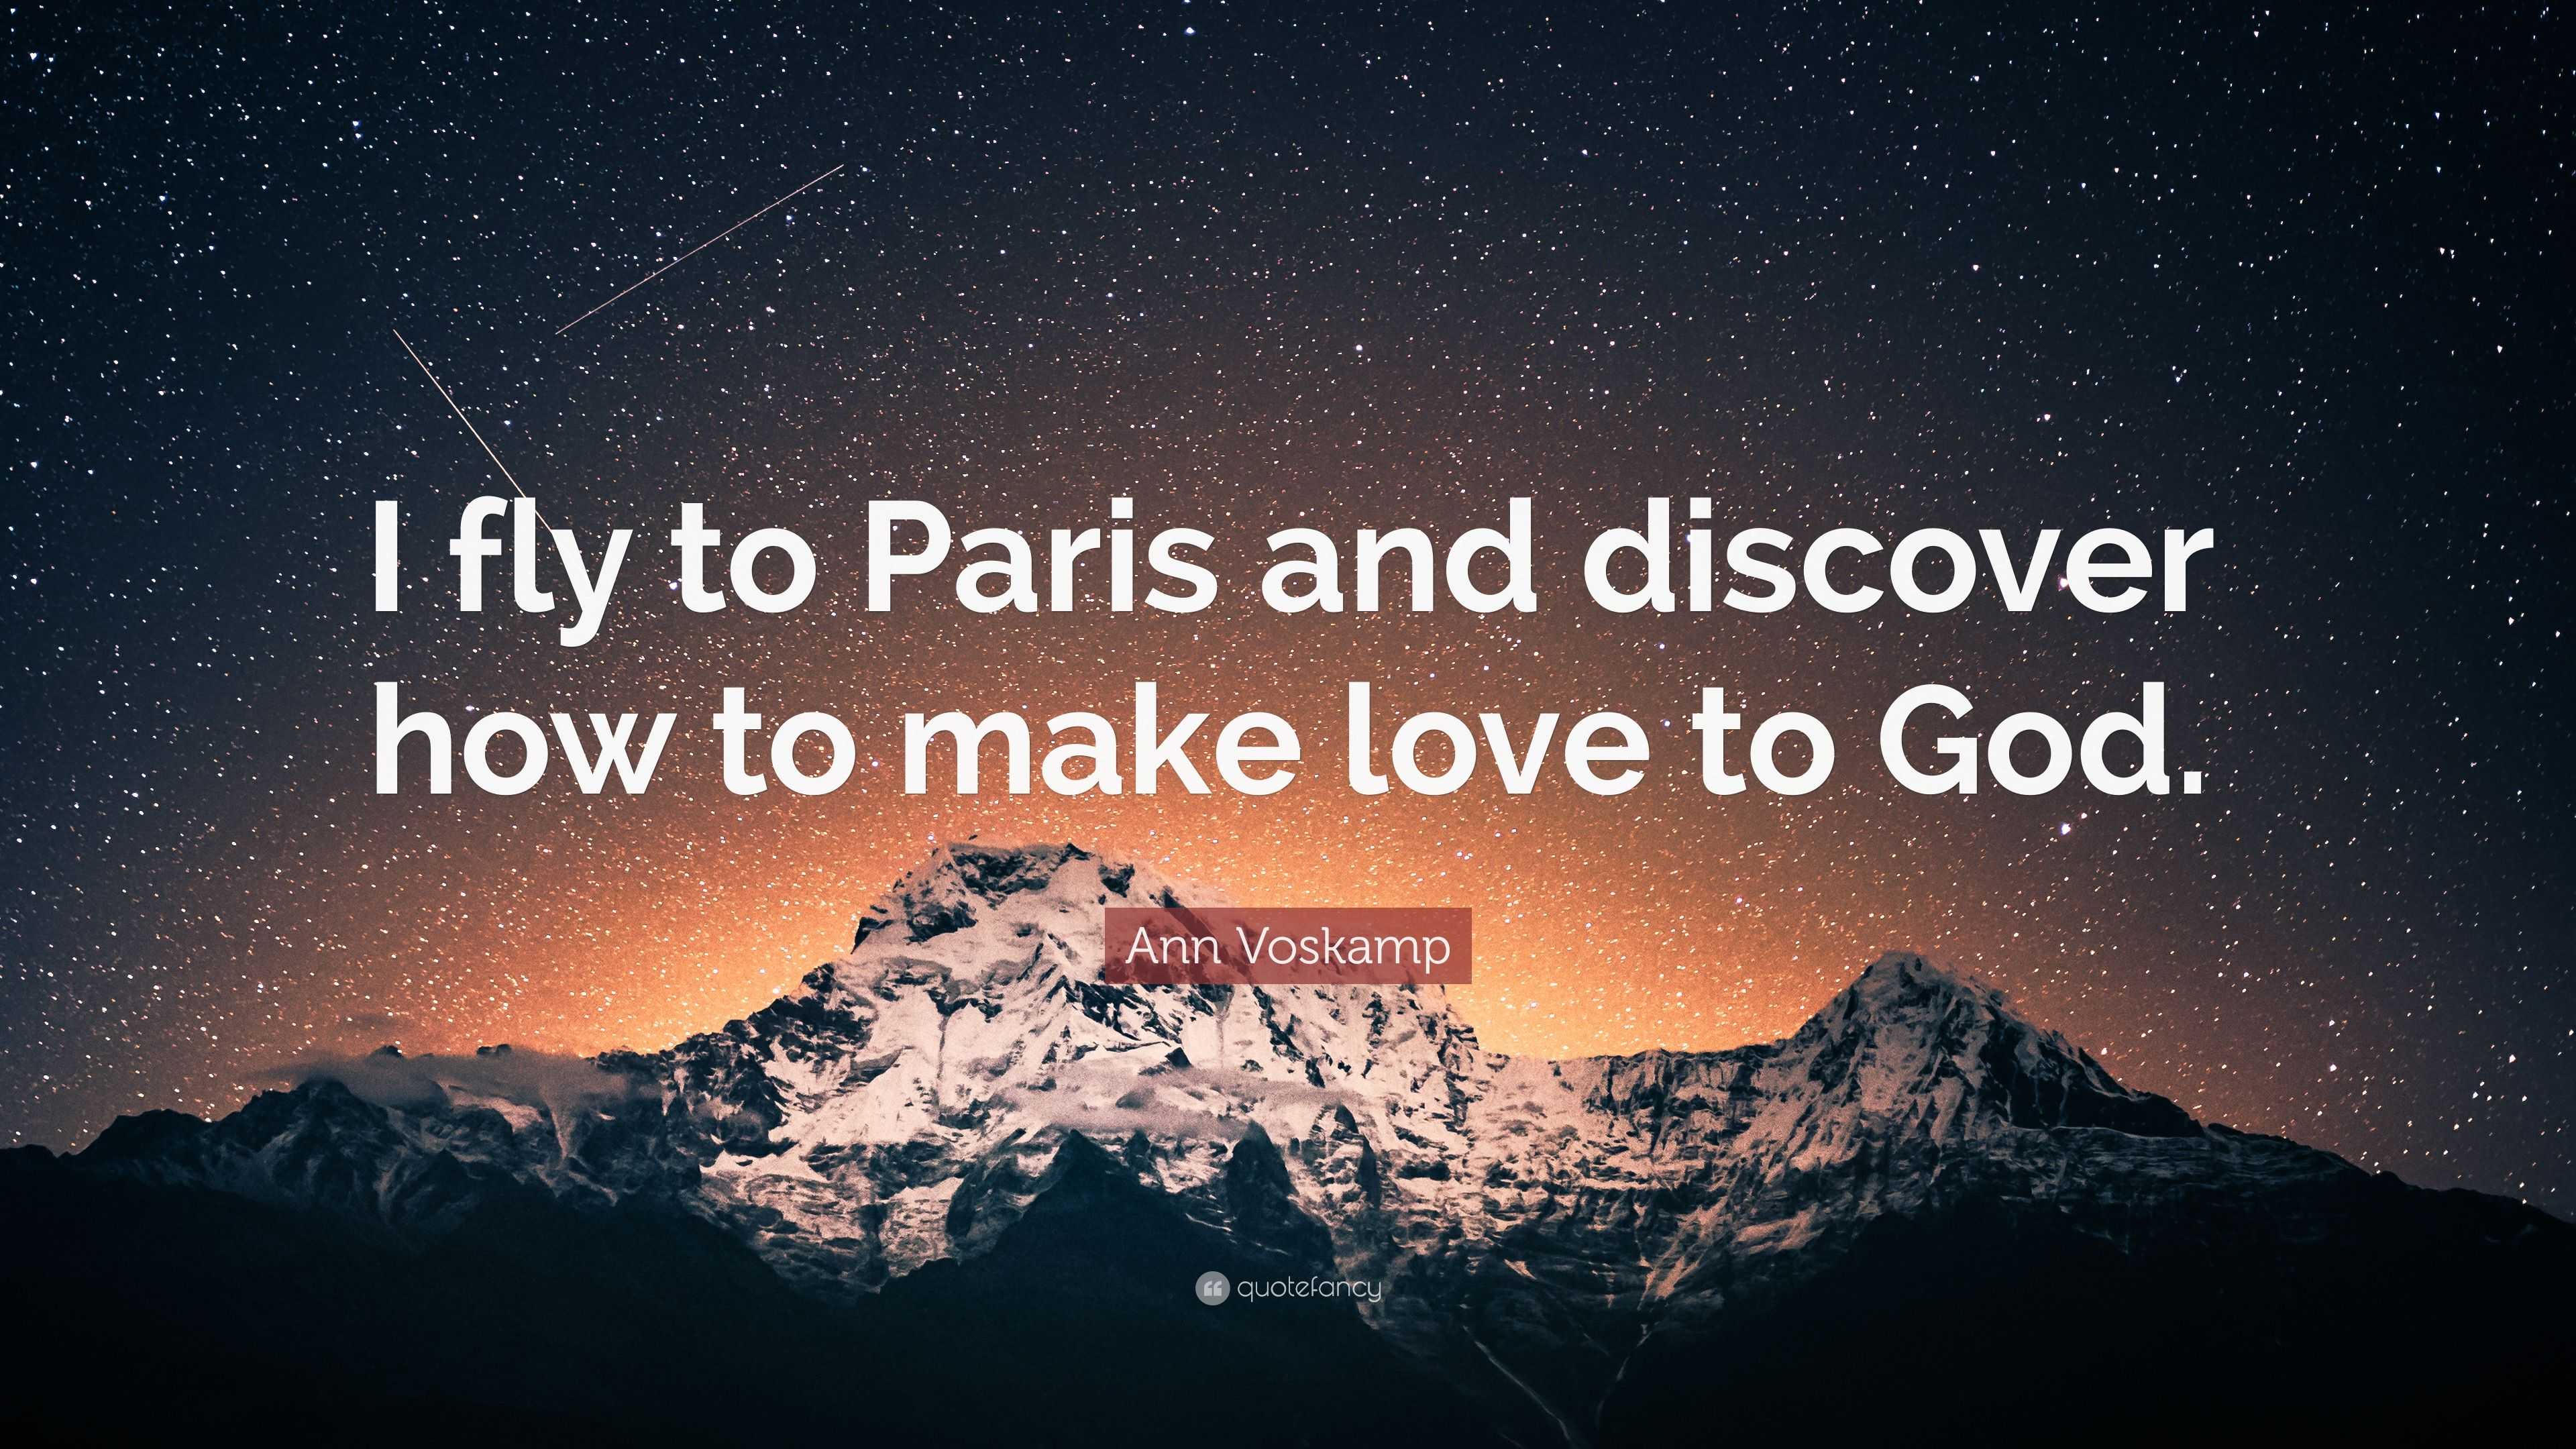 Ann Voskamp Quote: “I fly to Paris and discover how to make love to God.”